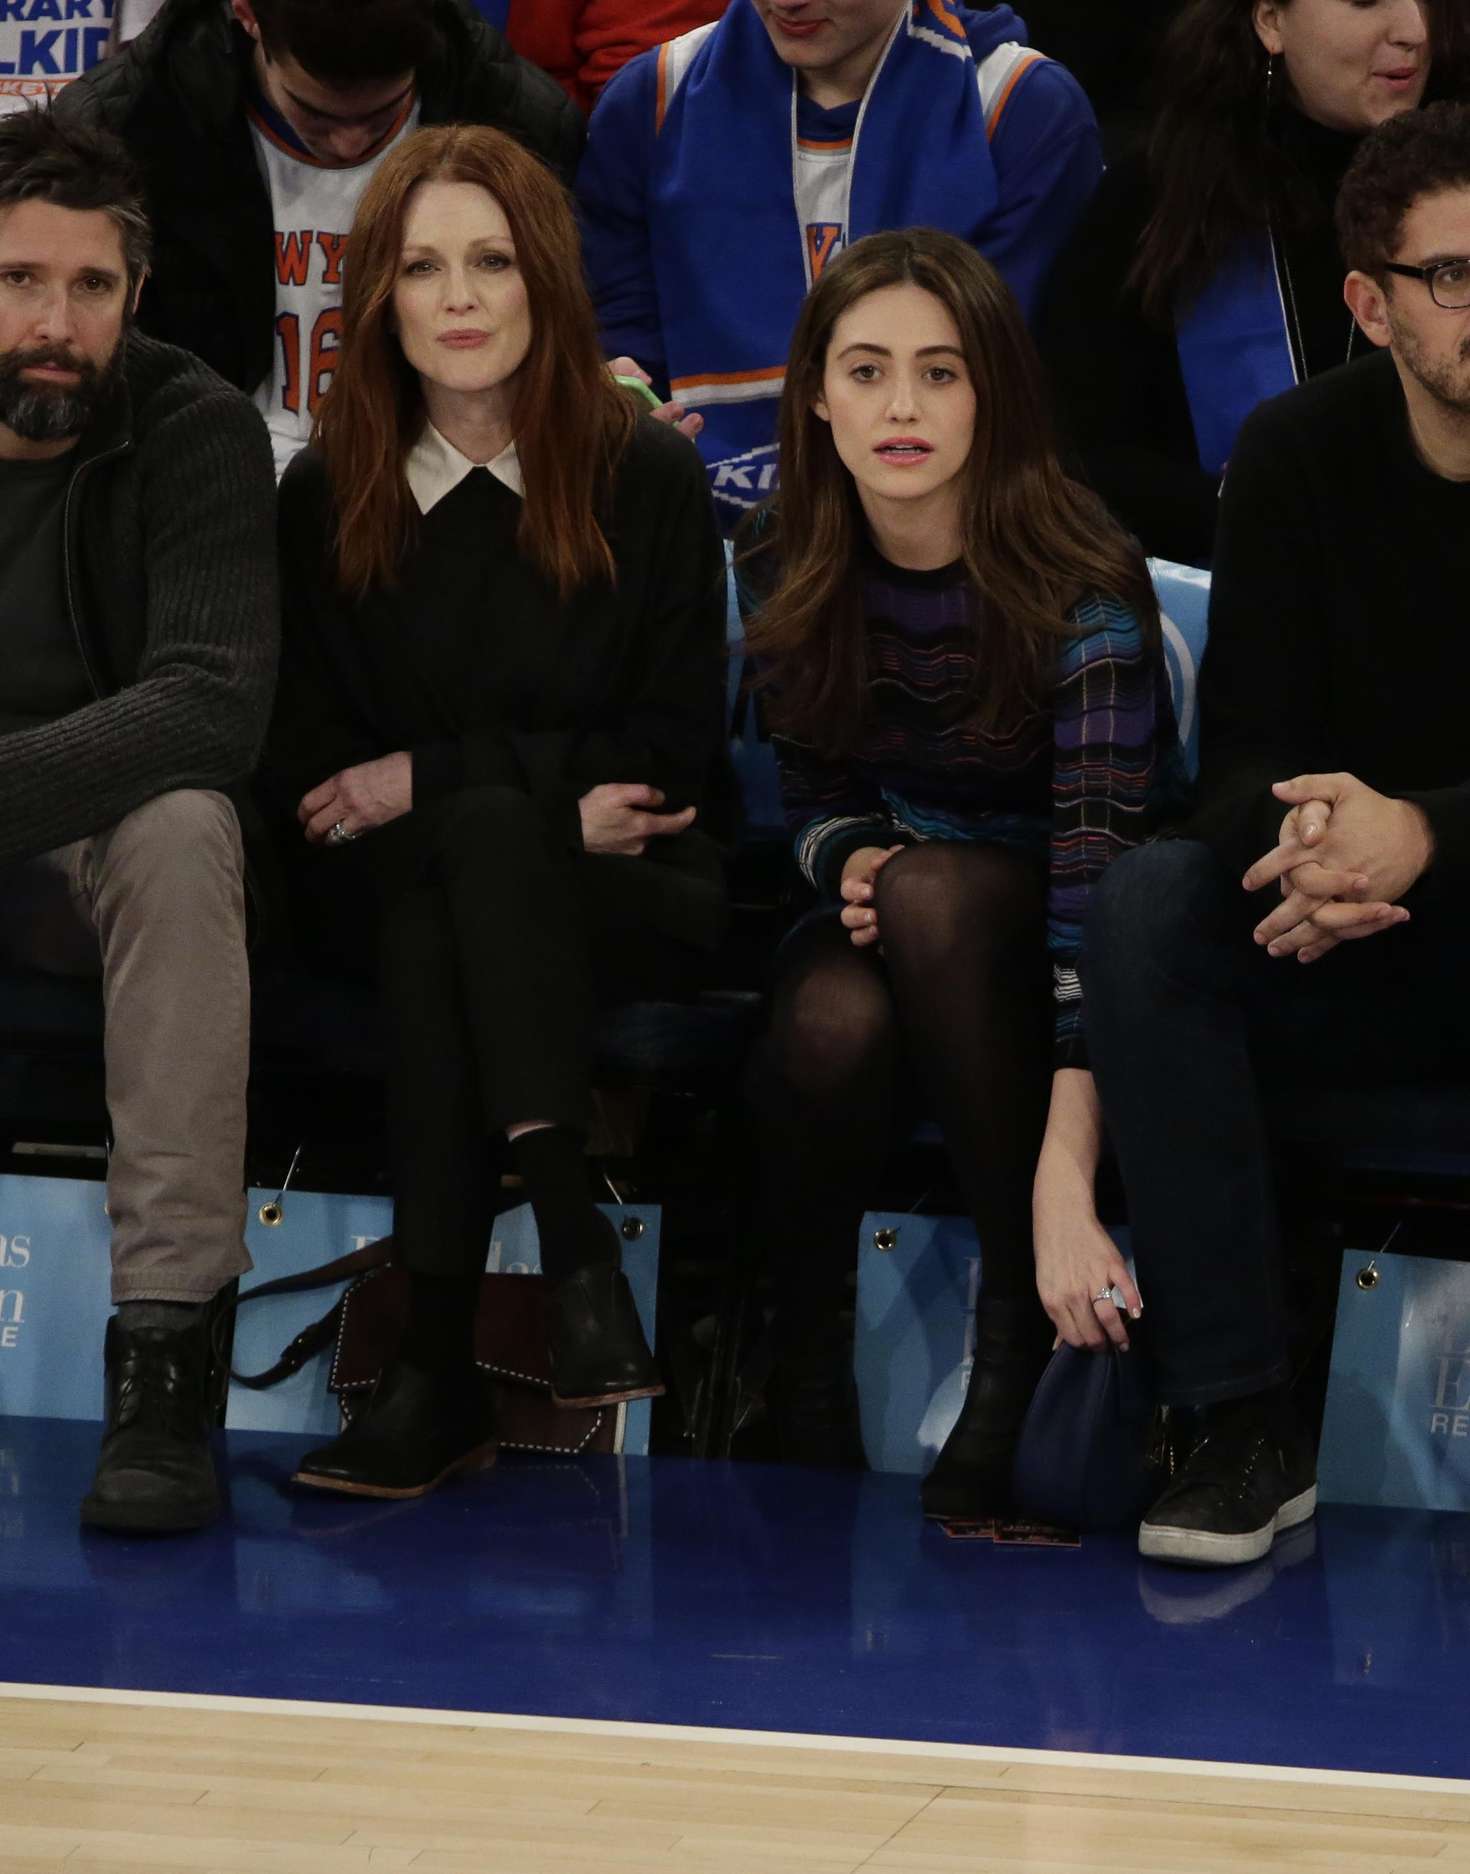 Julianne Moore and Emmy Rossum at the Knicks vs Clippers Game in NYC ...